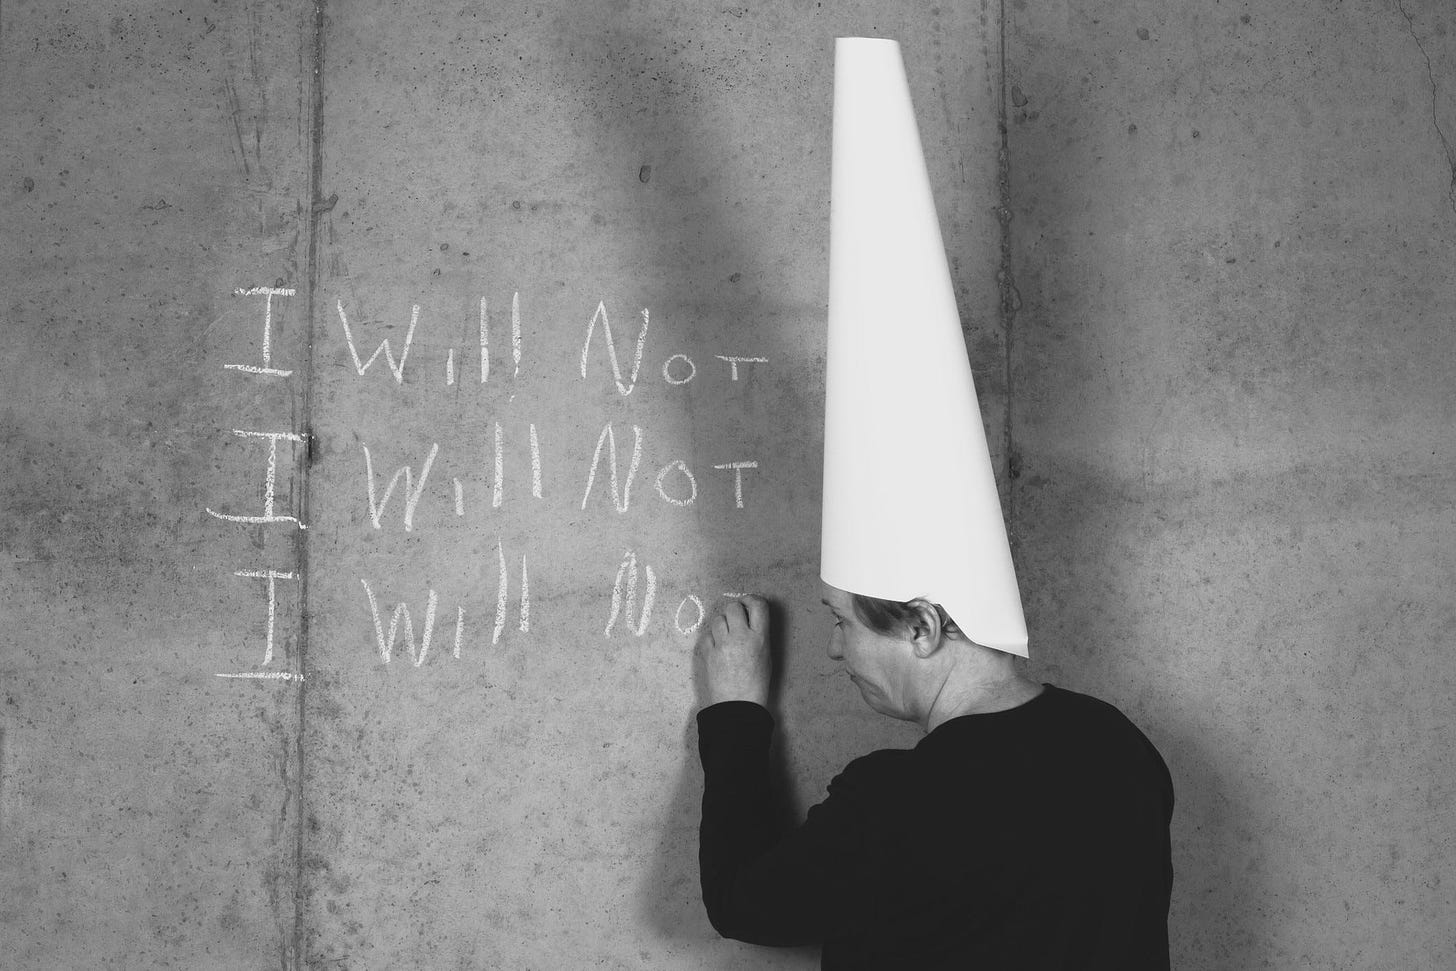 Man in a dunce cap standing before a chalkboard on which he has written, “I Will Not” three times.